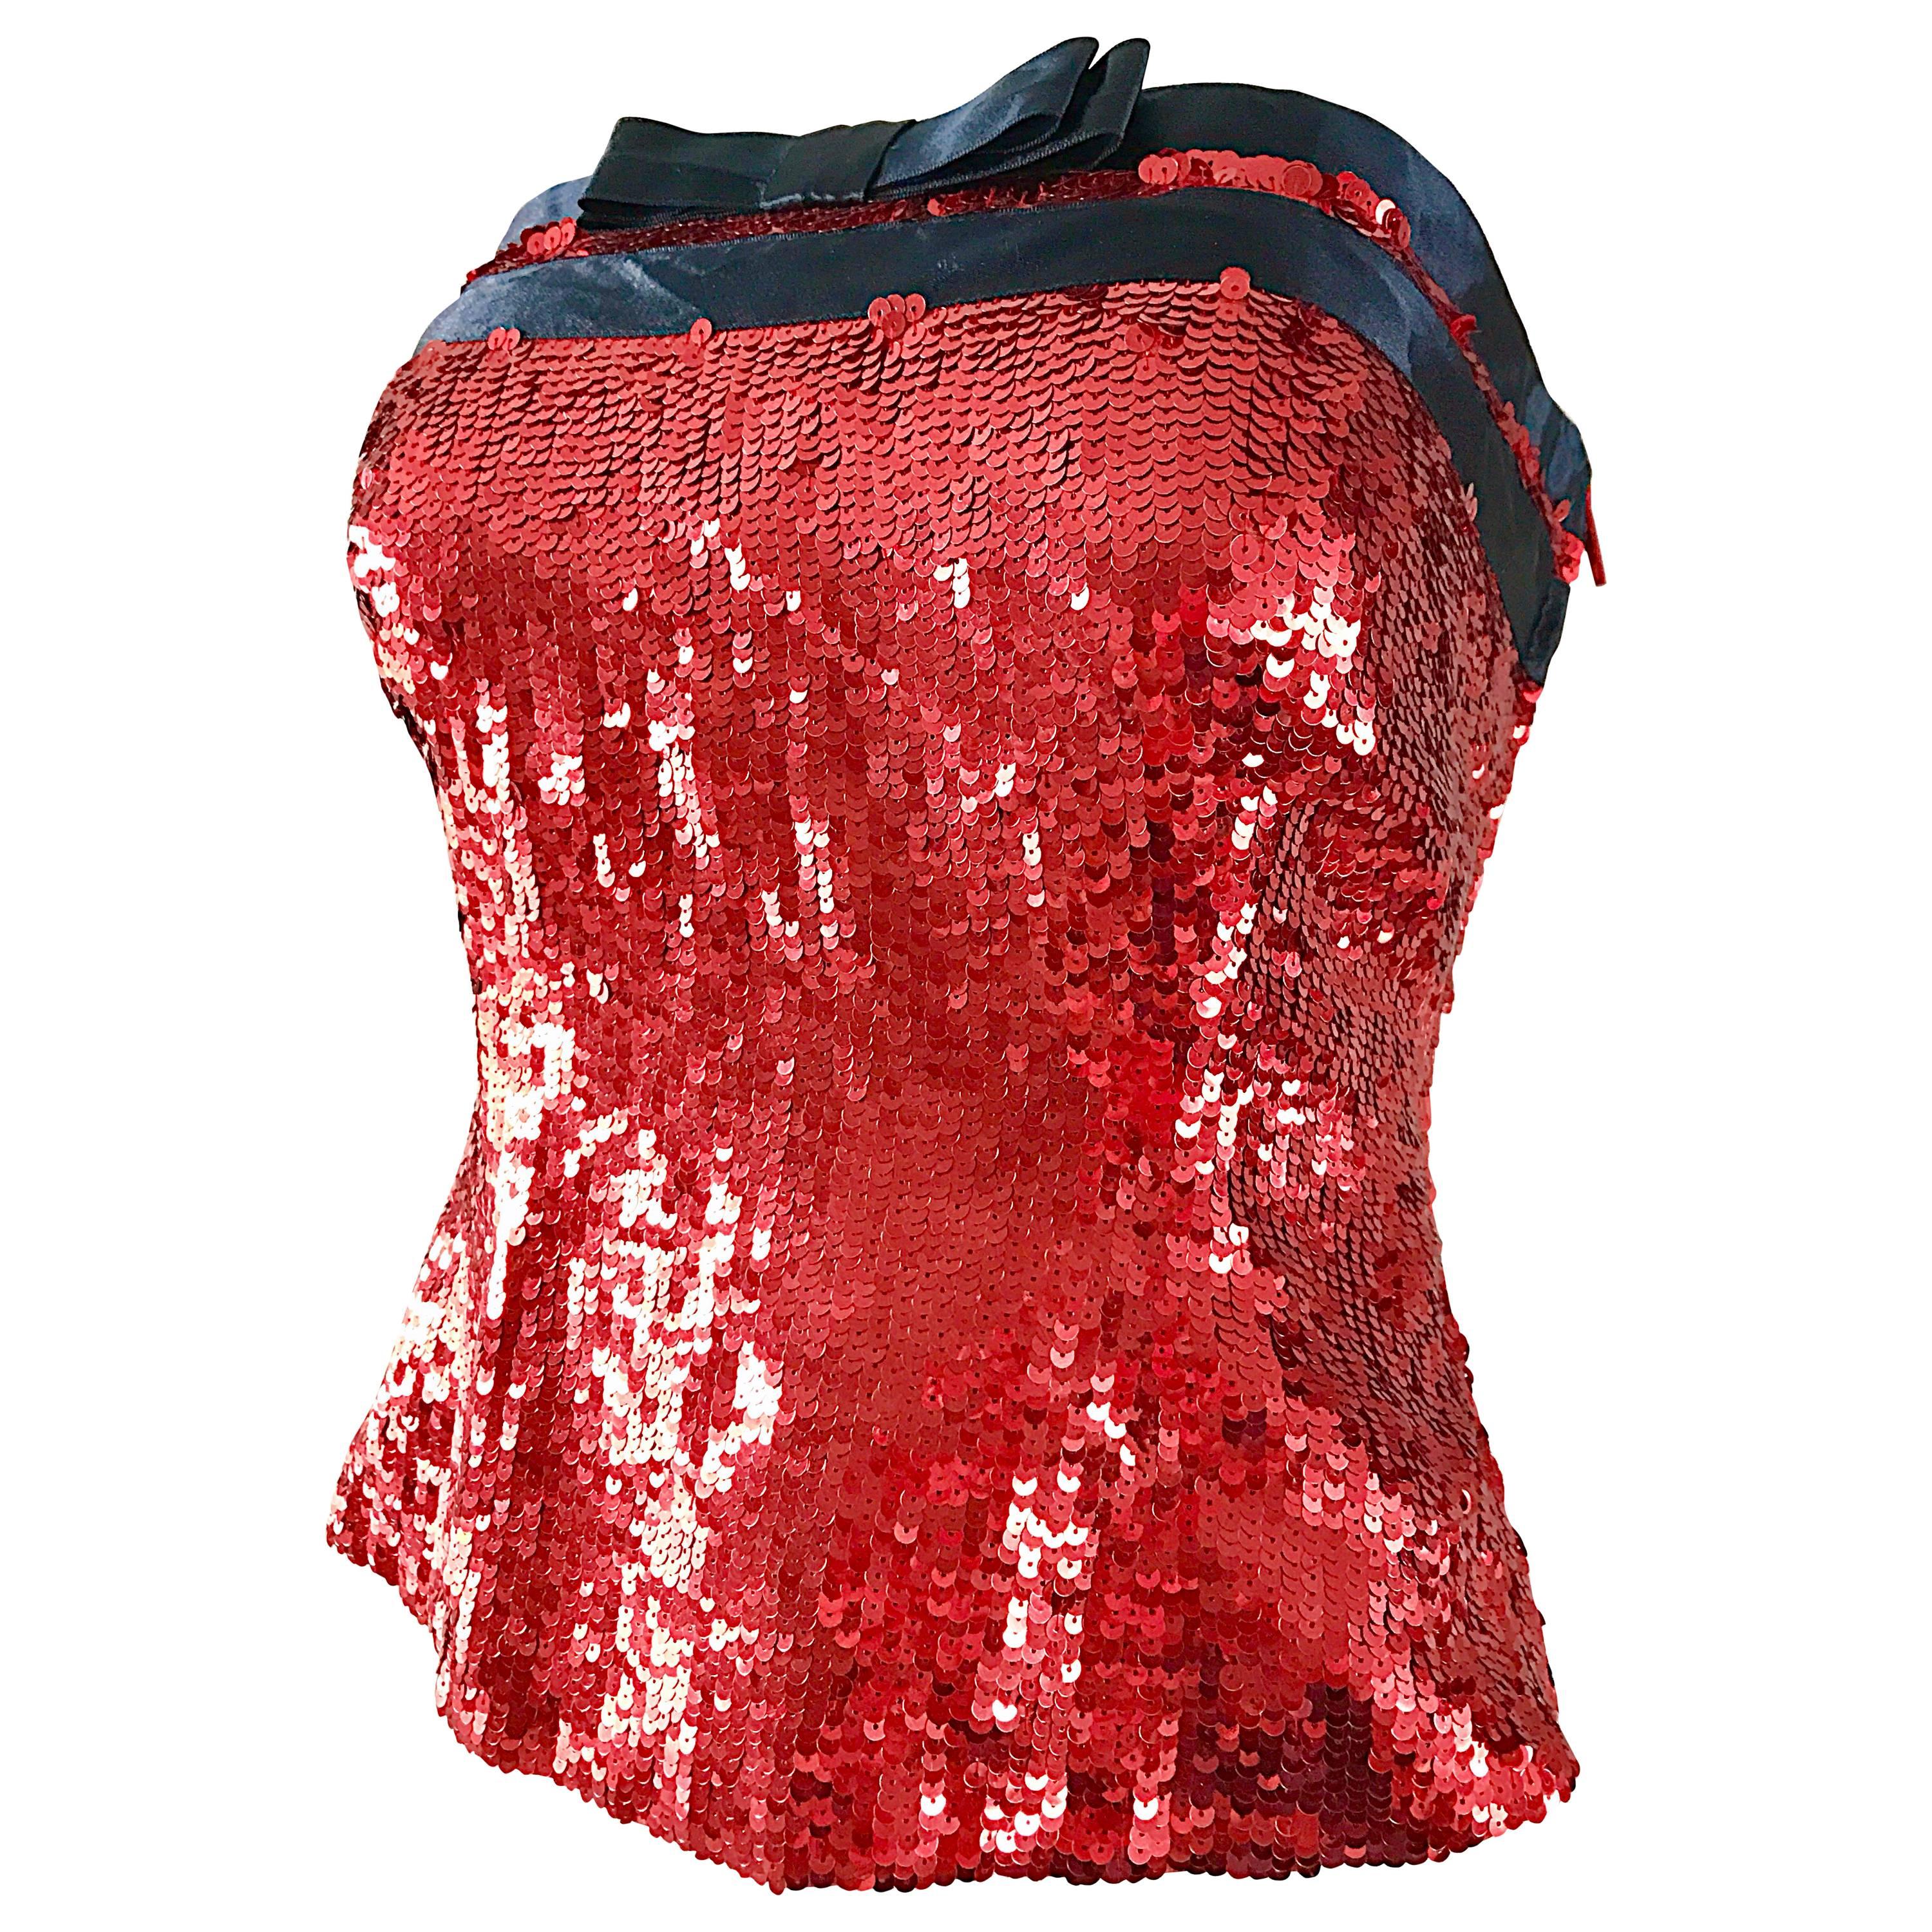 1990s Bill Blass Size 6 Red Sequin Black Strapless Bustier Vintage Corset Top For Sale